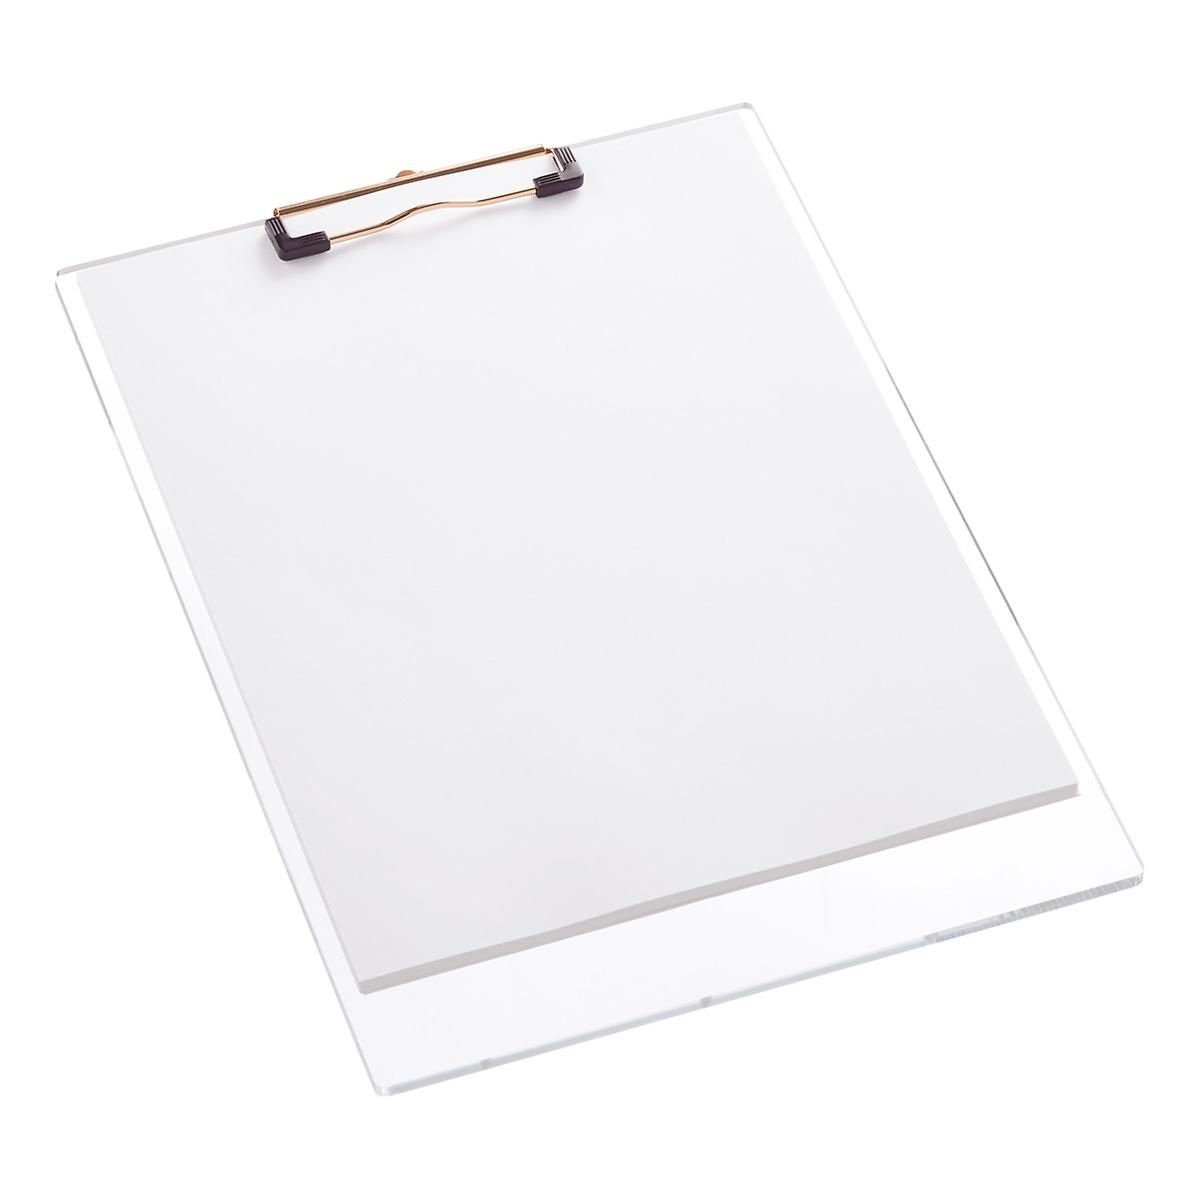 Russell + Hazel Clear & Gold Acrylic Clipboard | The Container Store